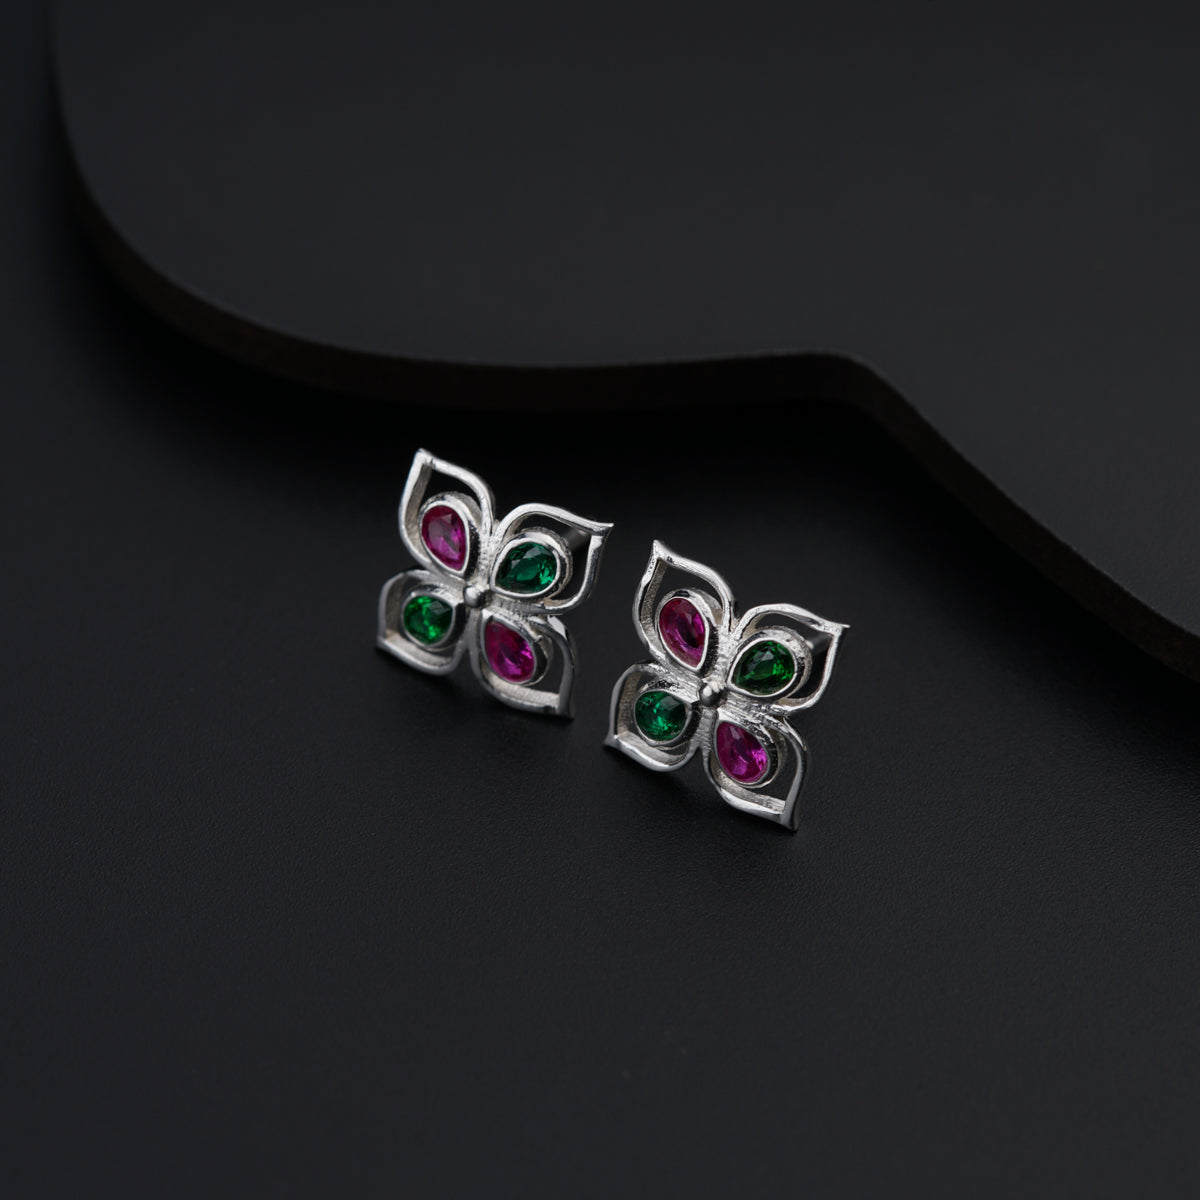 a pair of earrings with colorful stones on a black surface